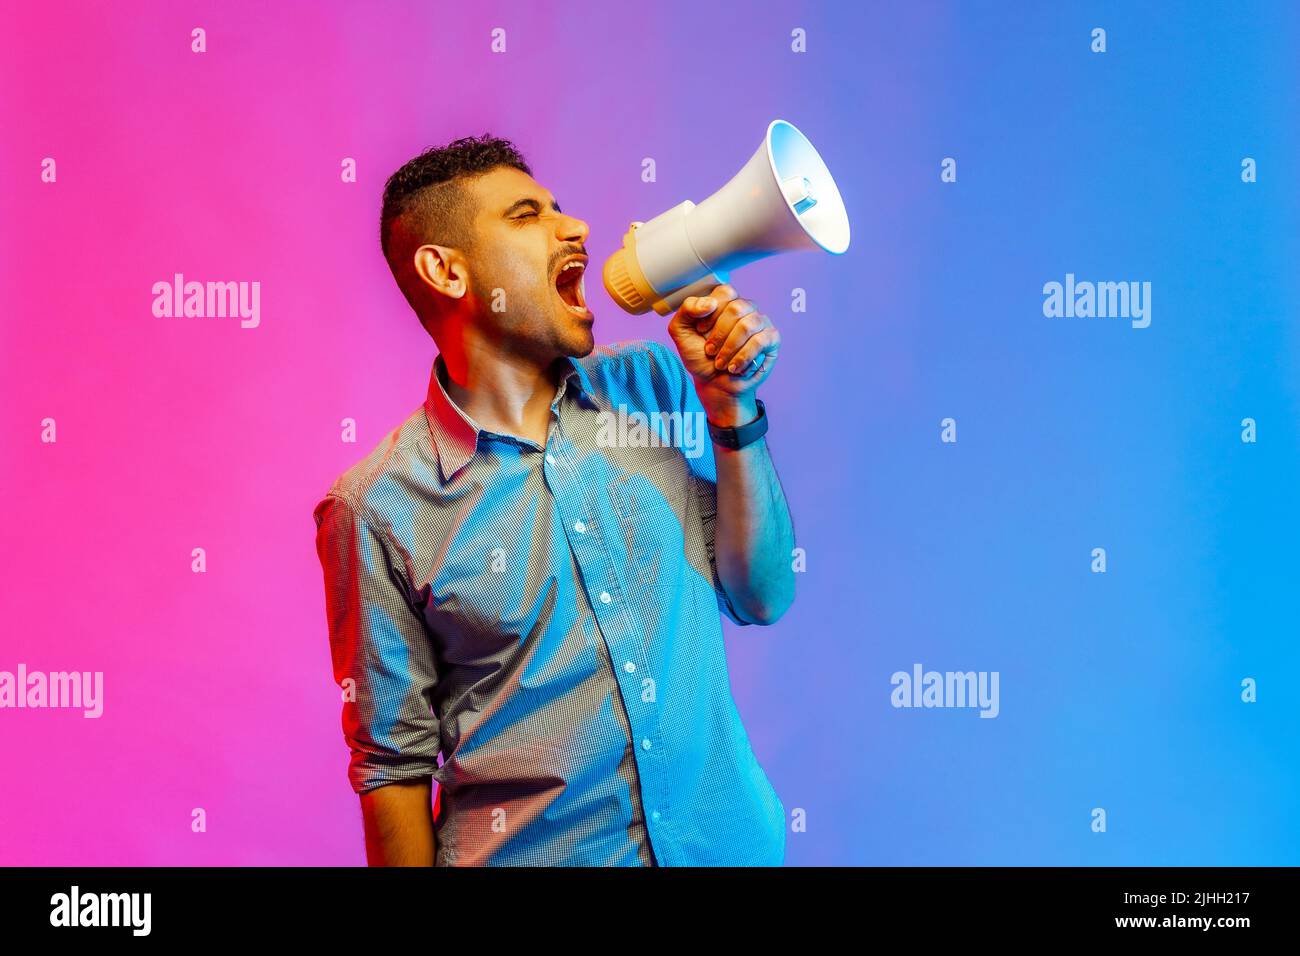 Portrait of aggressive man in shirt screaming at megaphone, making announce, protesting, looking away with angry expression. Indoor studio shot isolated on colorful neon light background. Stock Photo